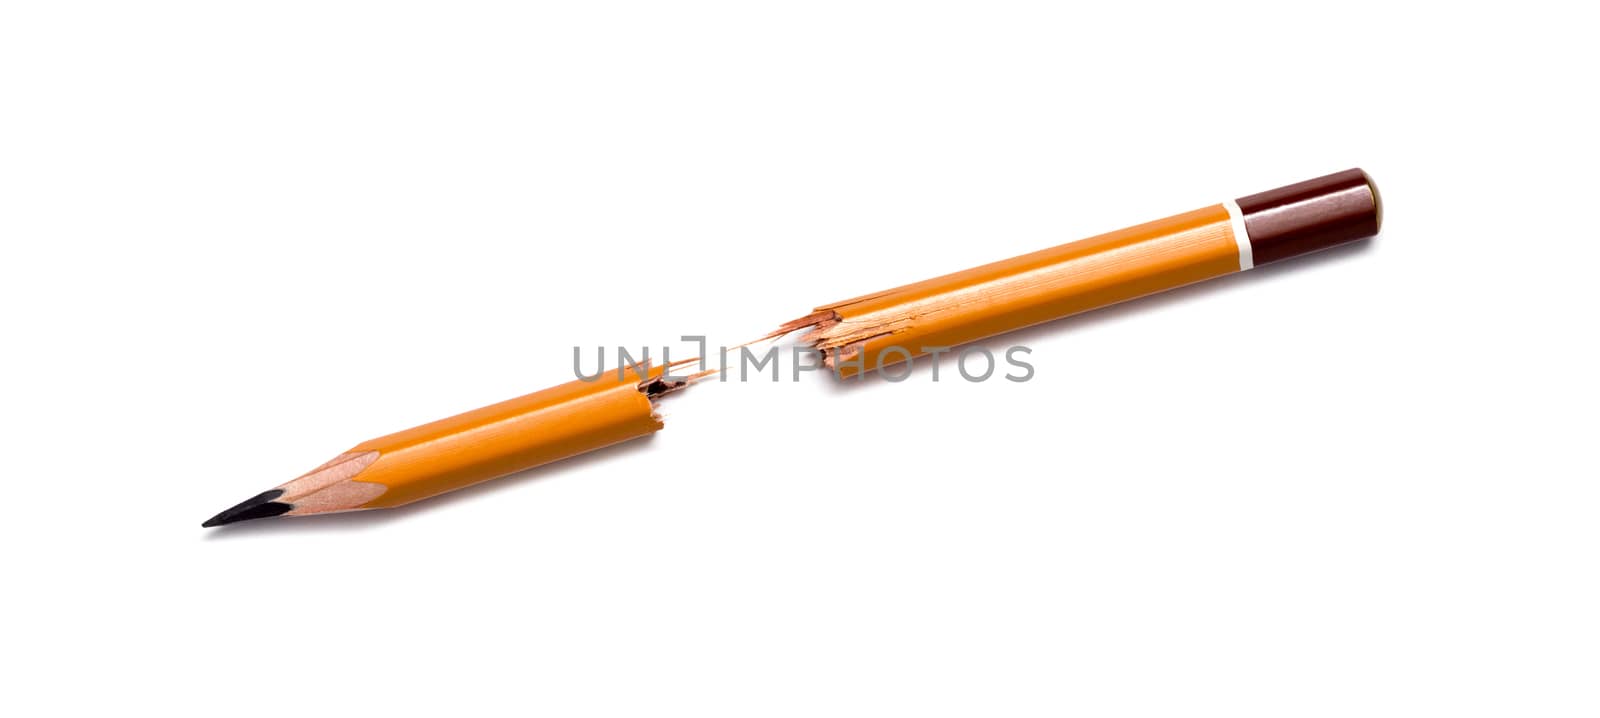 broken pencil on a white background by DNKSTUDIO